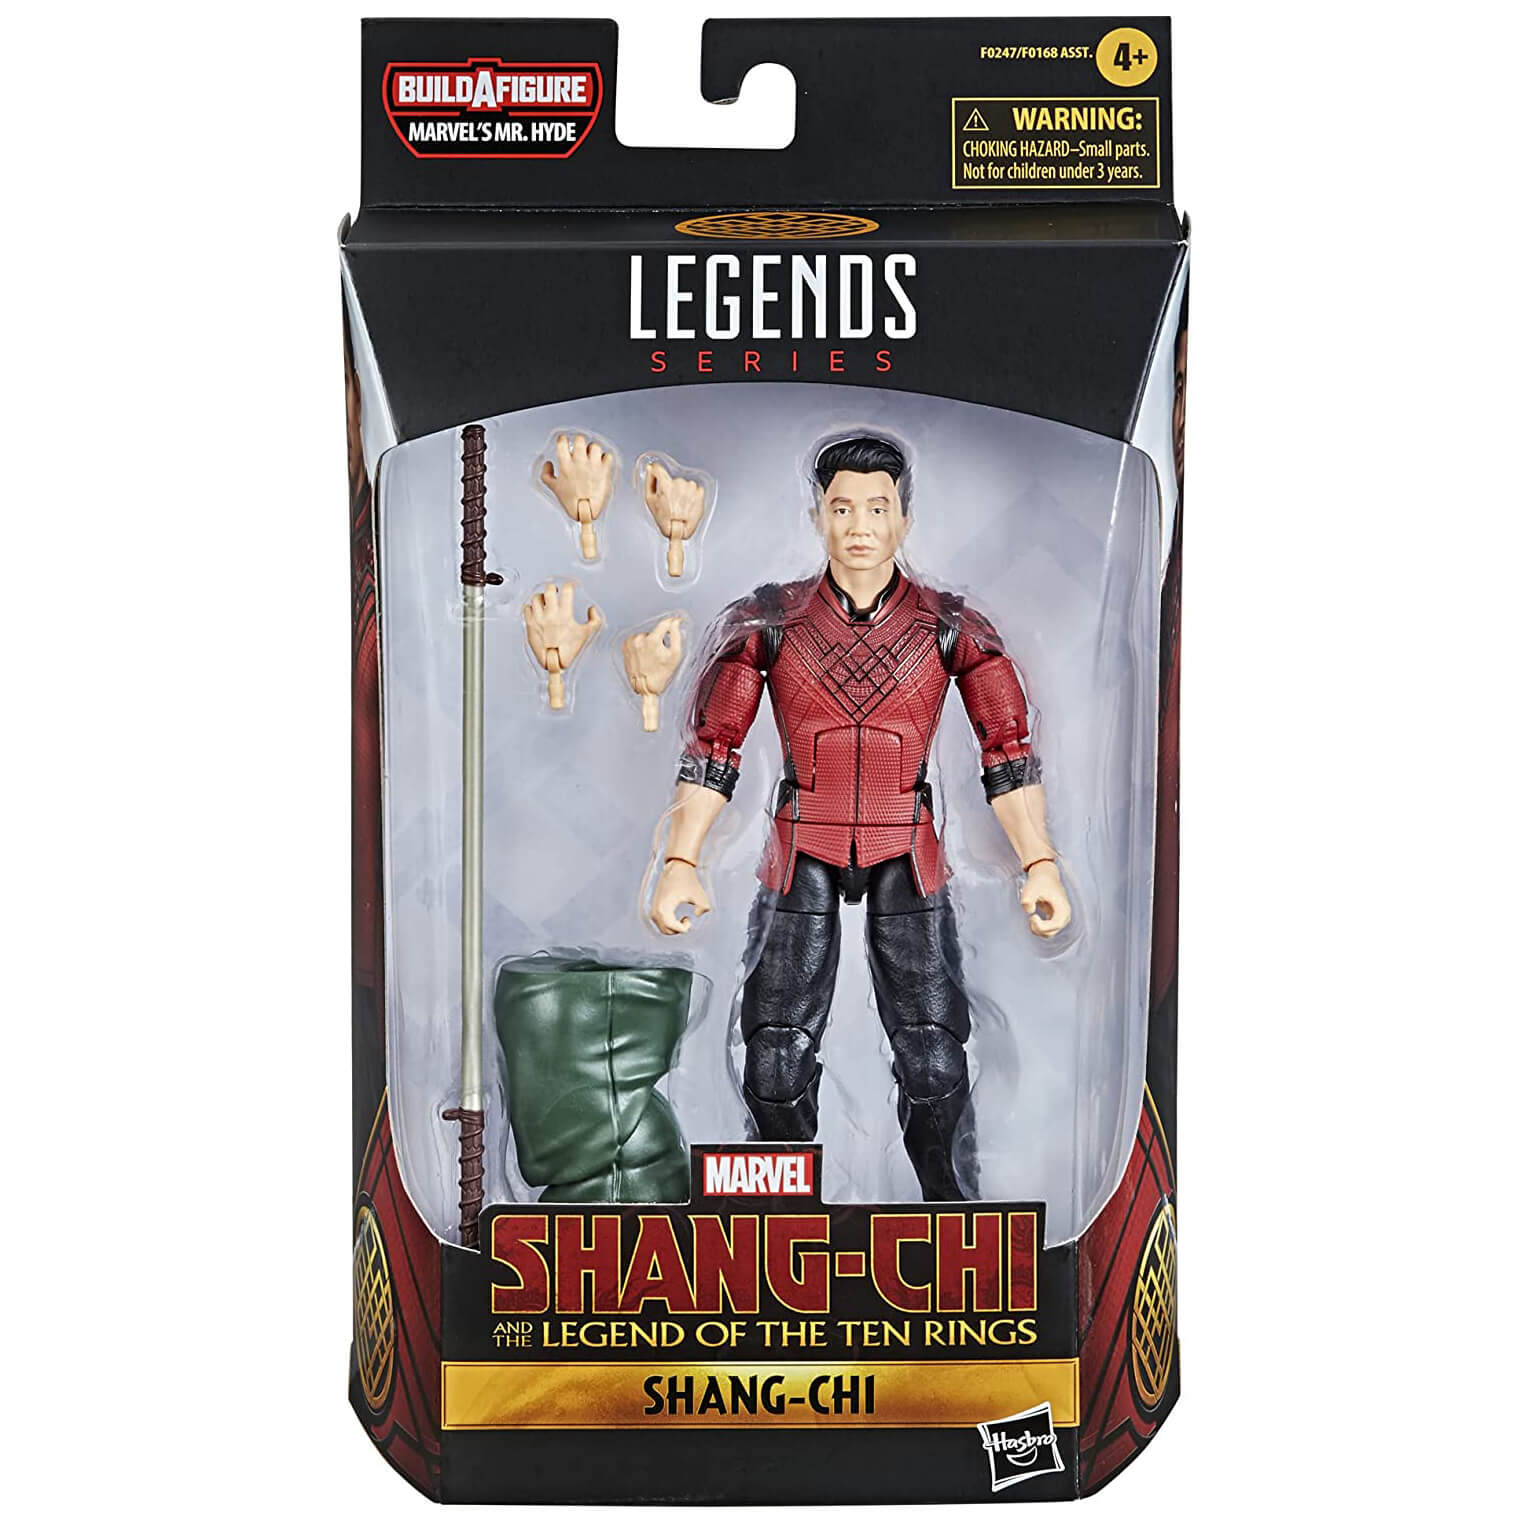 Marvel Legends Shang-Chi Legend of the Ten Rings Shang-Chi Figure